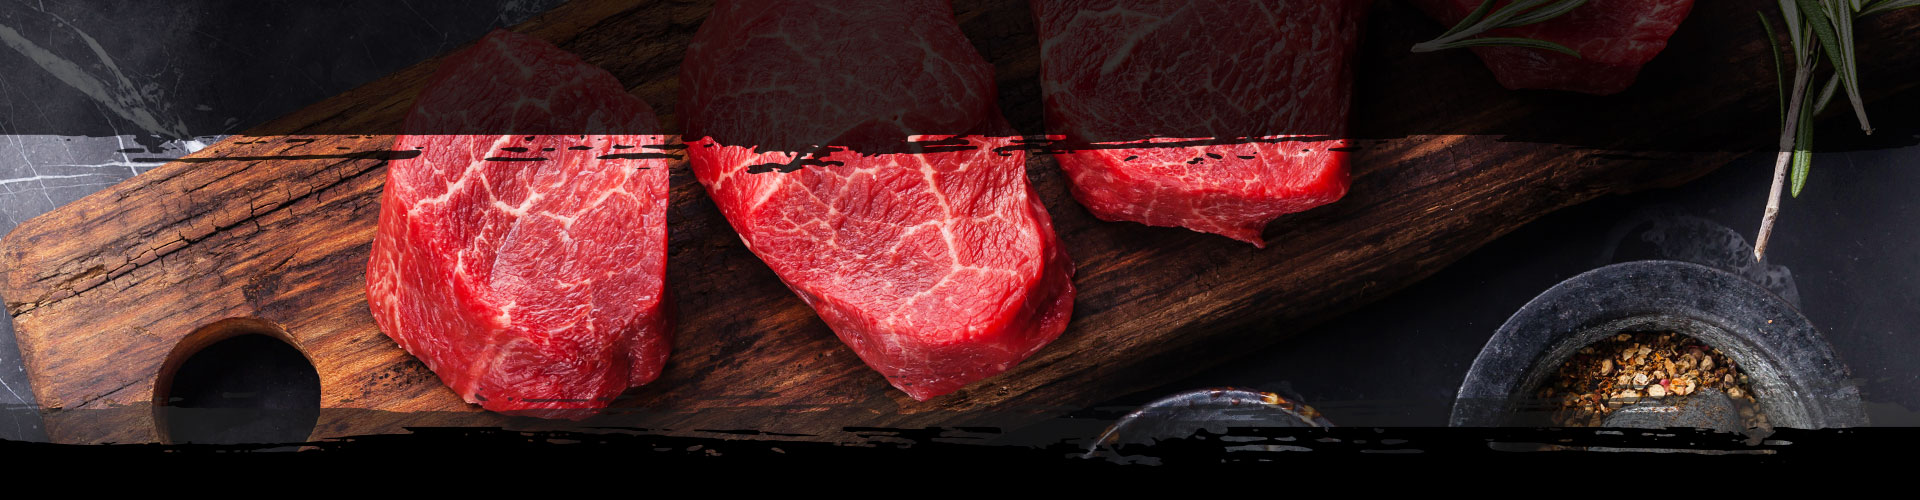 Now Available: Chef’s Exclusive Black Angus Beef